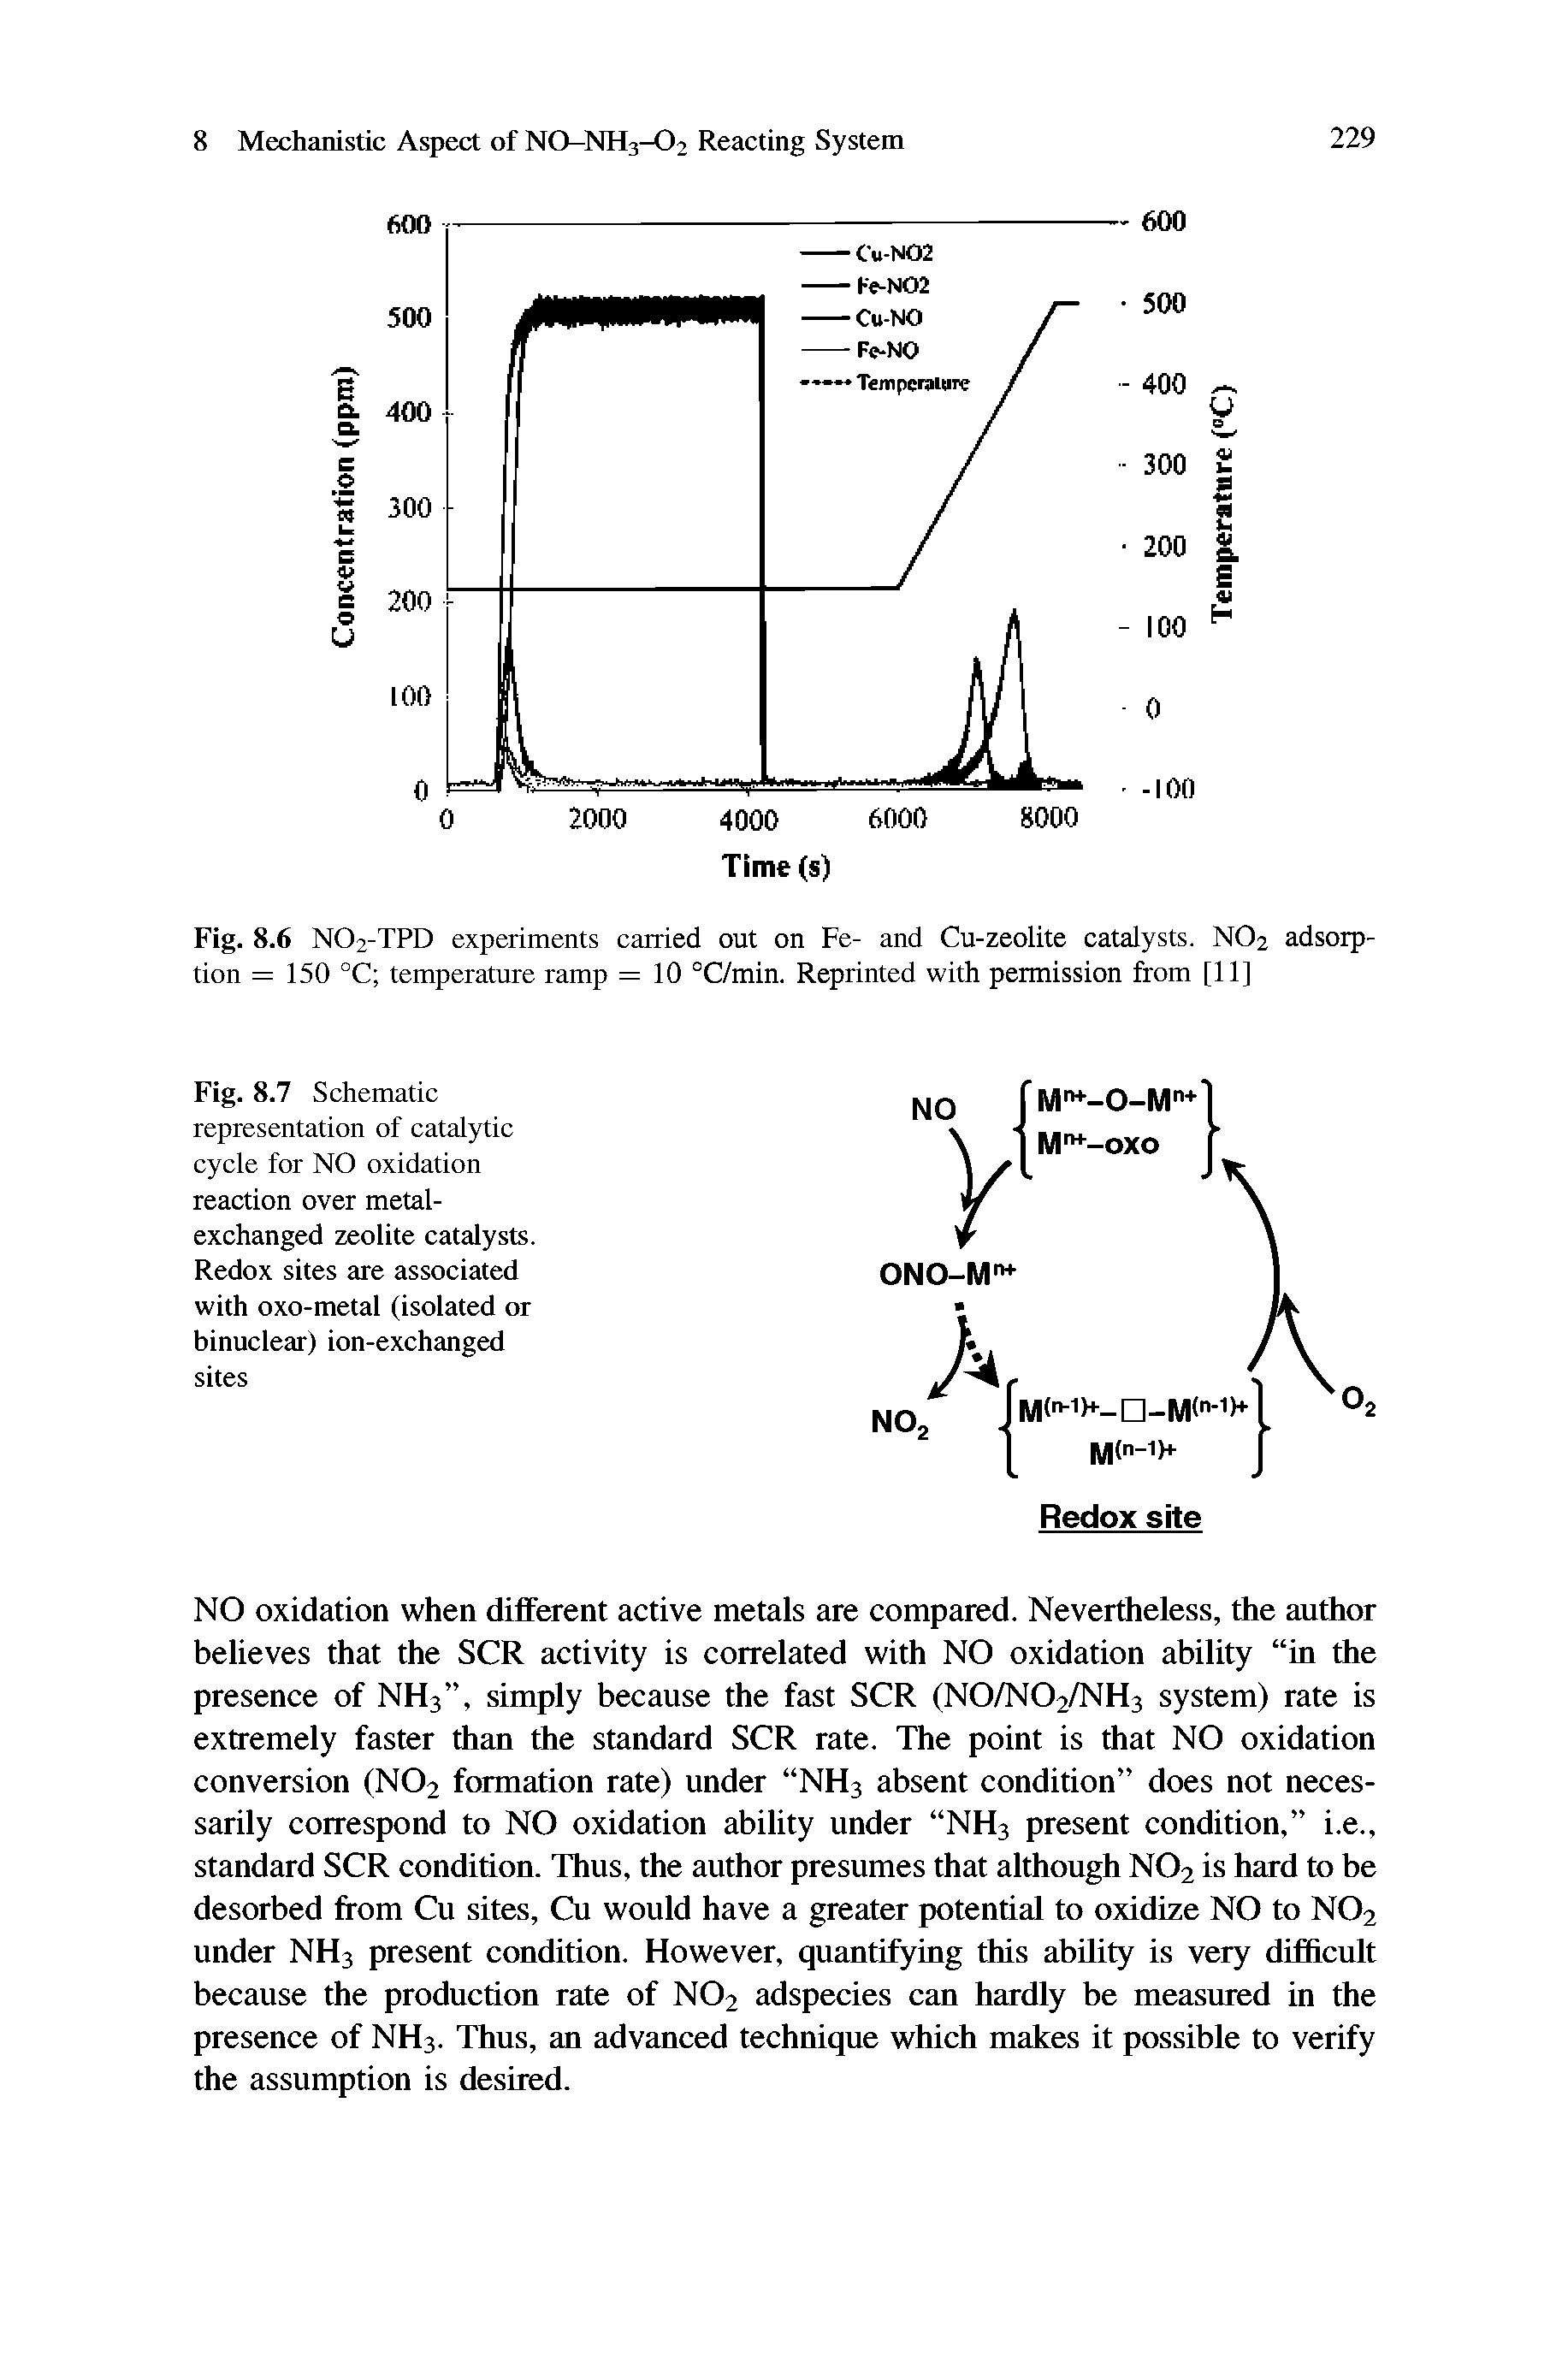 Fig. 8.7 Schematic representation of catalytic cycle for NO oxidation reaction over metal-exchanged zeolite catalysts. Redox sites are associated with oxo-metal (isolated or binuclear) ion-exchanged sites...